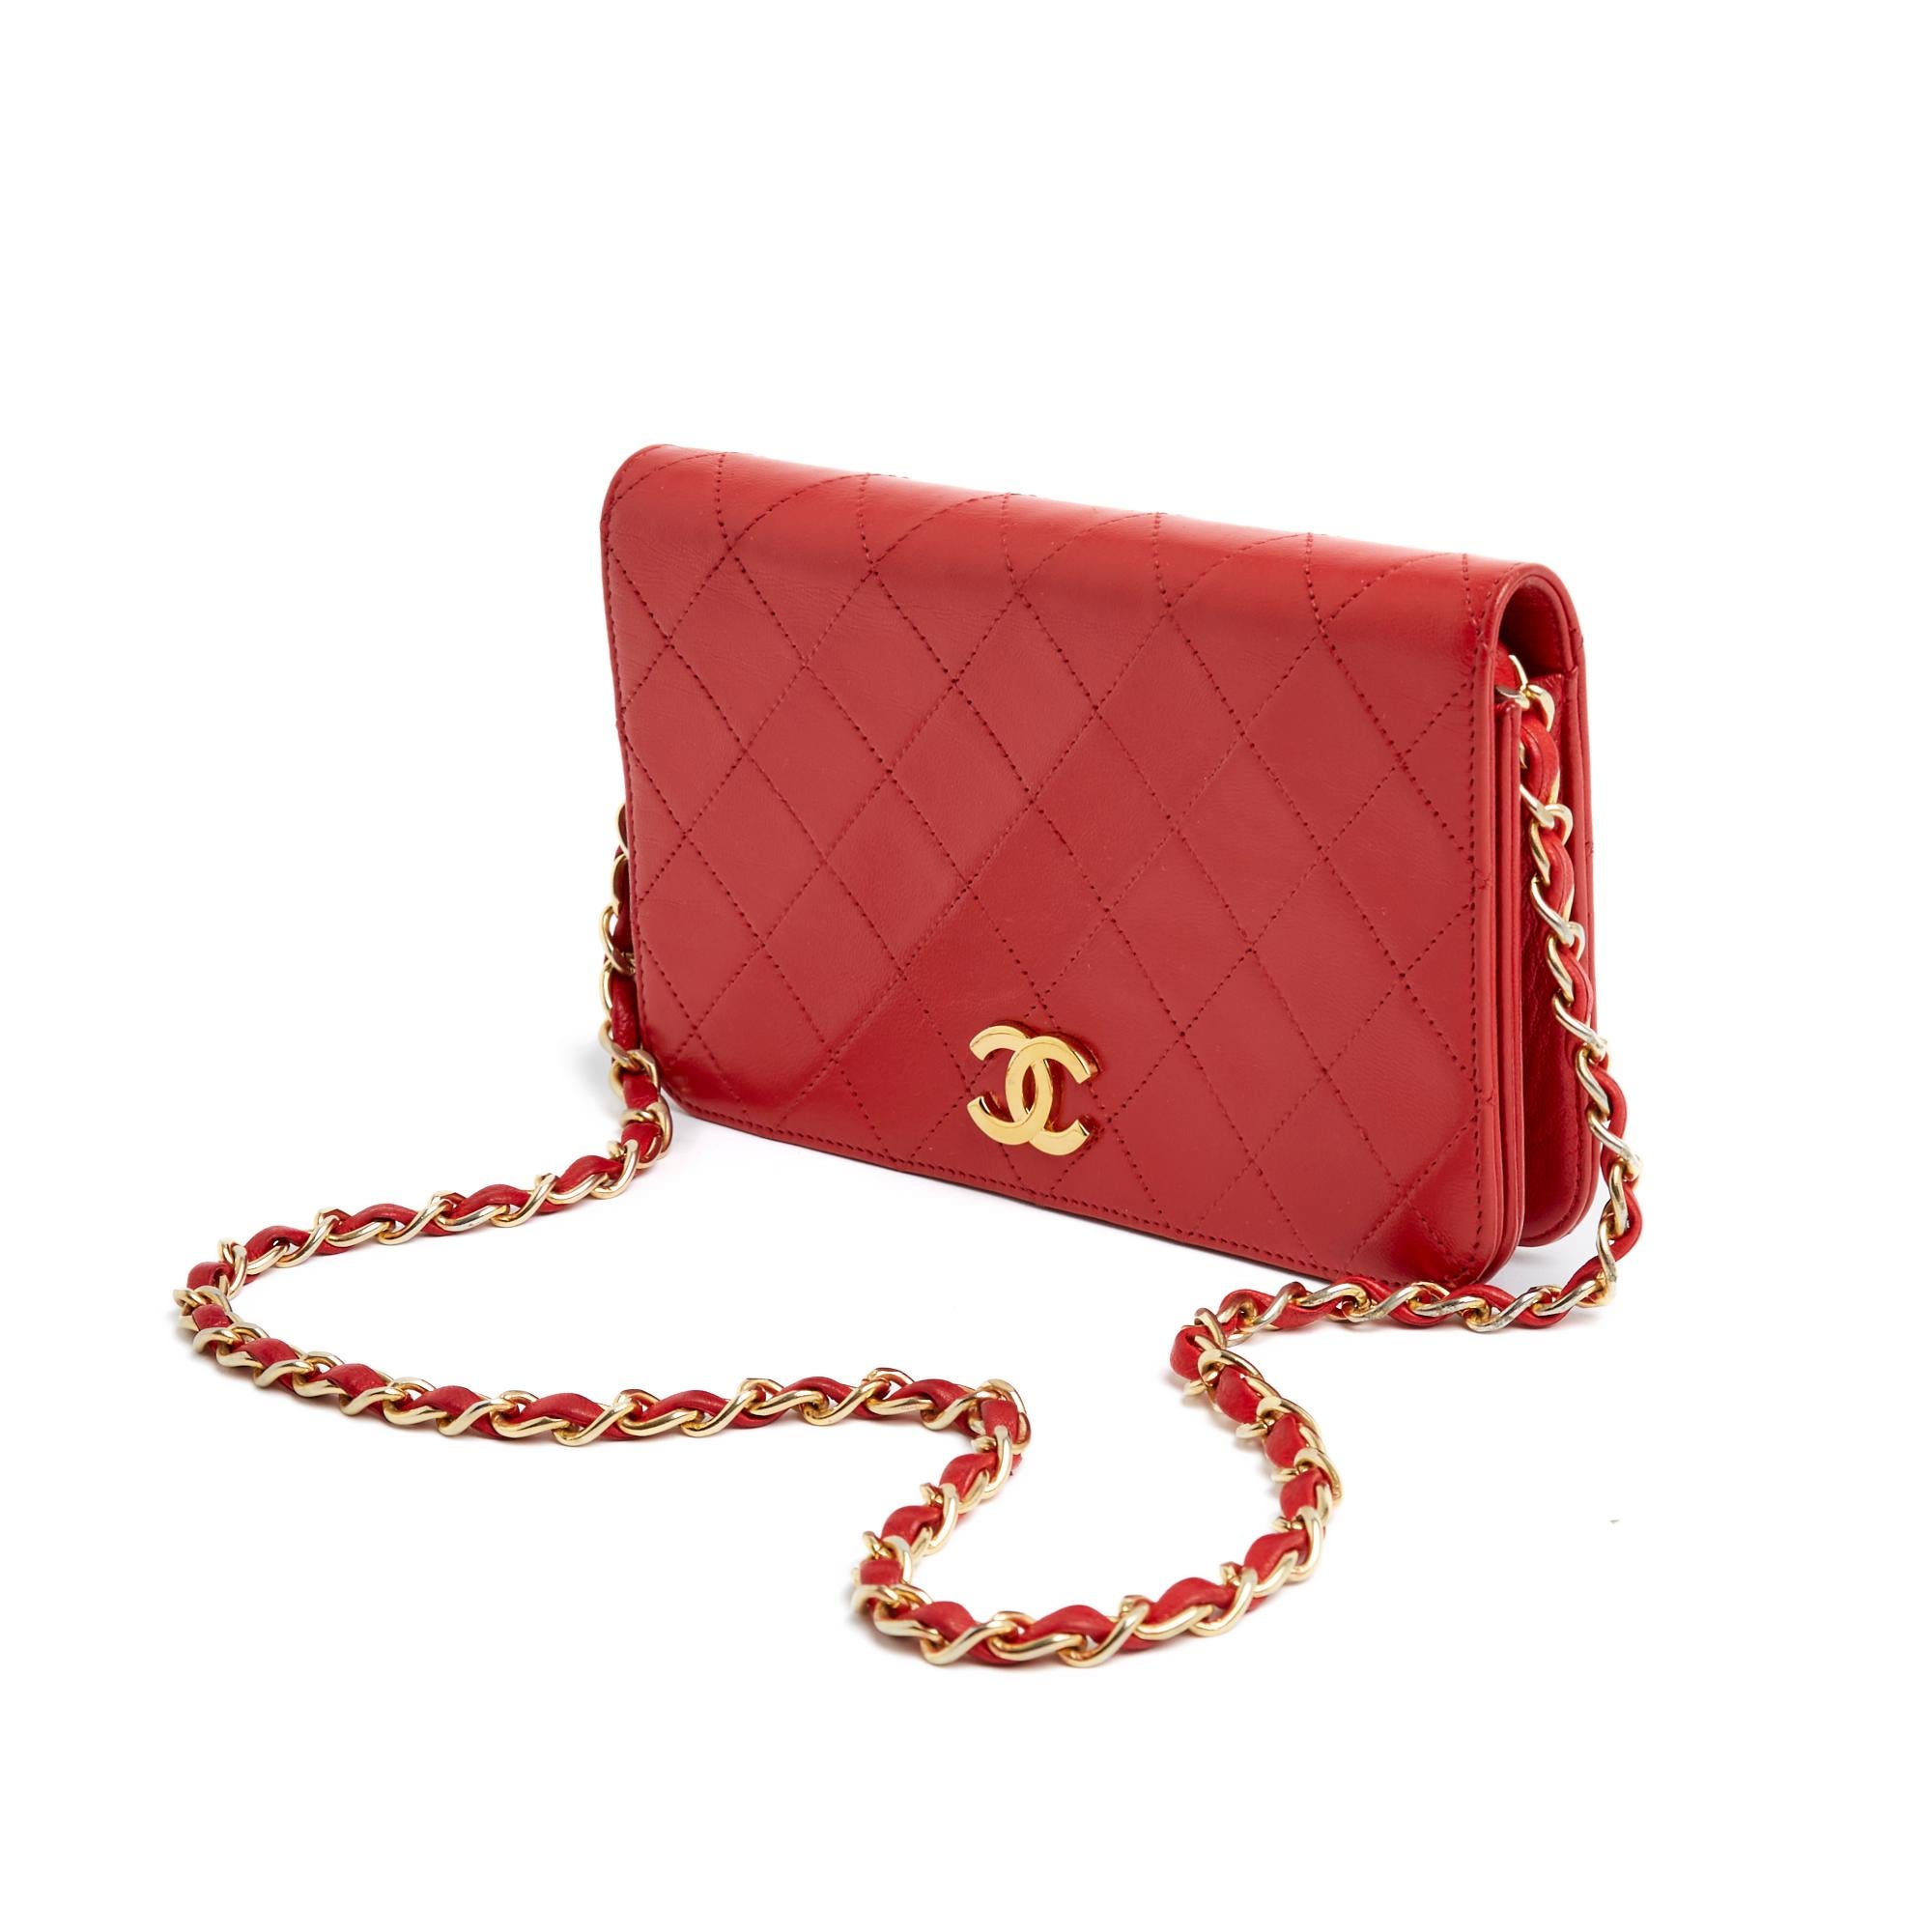 Vintage Chanel Wallet on Chain model bag in bright red quilted leather, flap closed by press stud under the CC logo, black leather interior with 1 patch pocket, shoulder strap in gold metal chain interlaced with coordinated leather for shoulder or